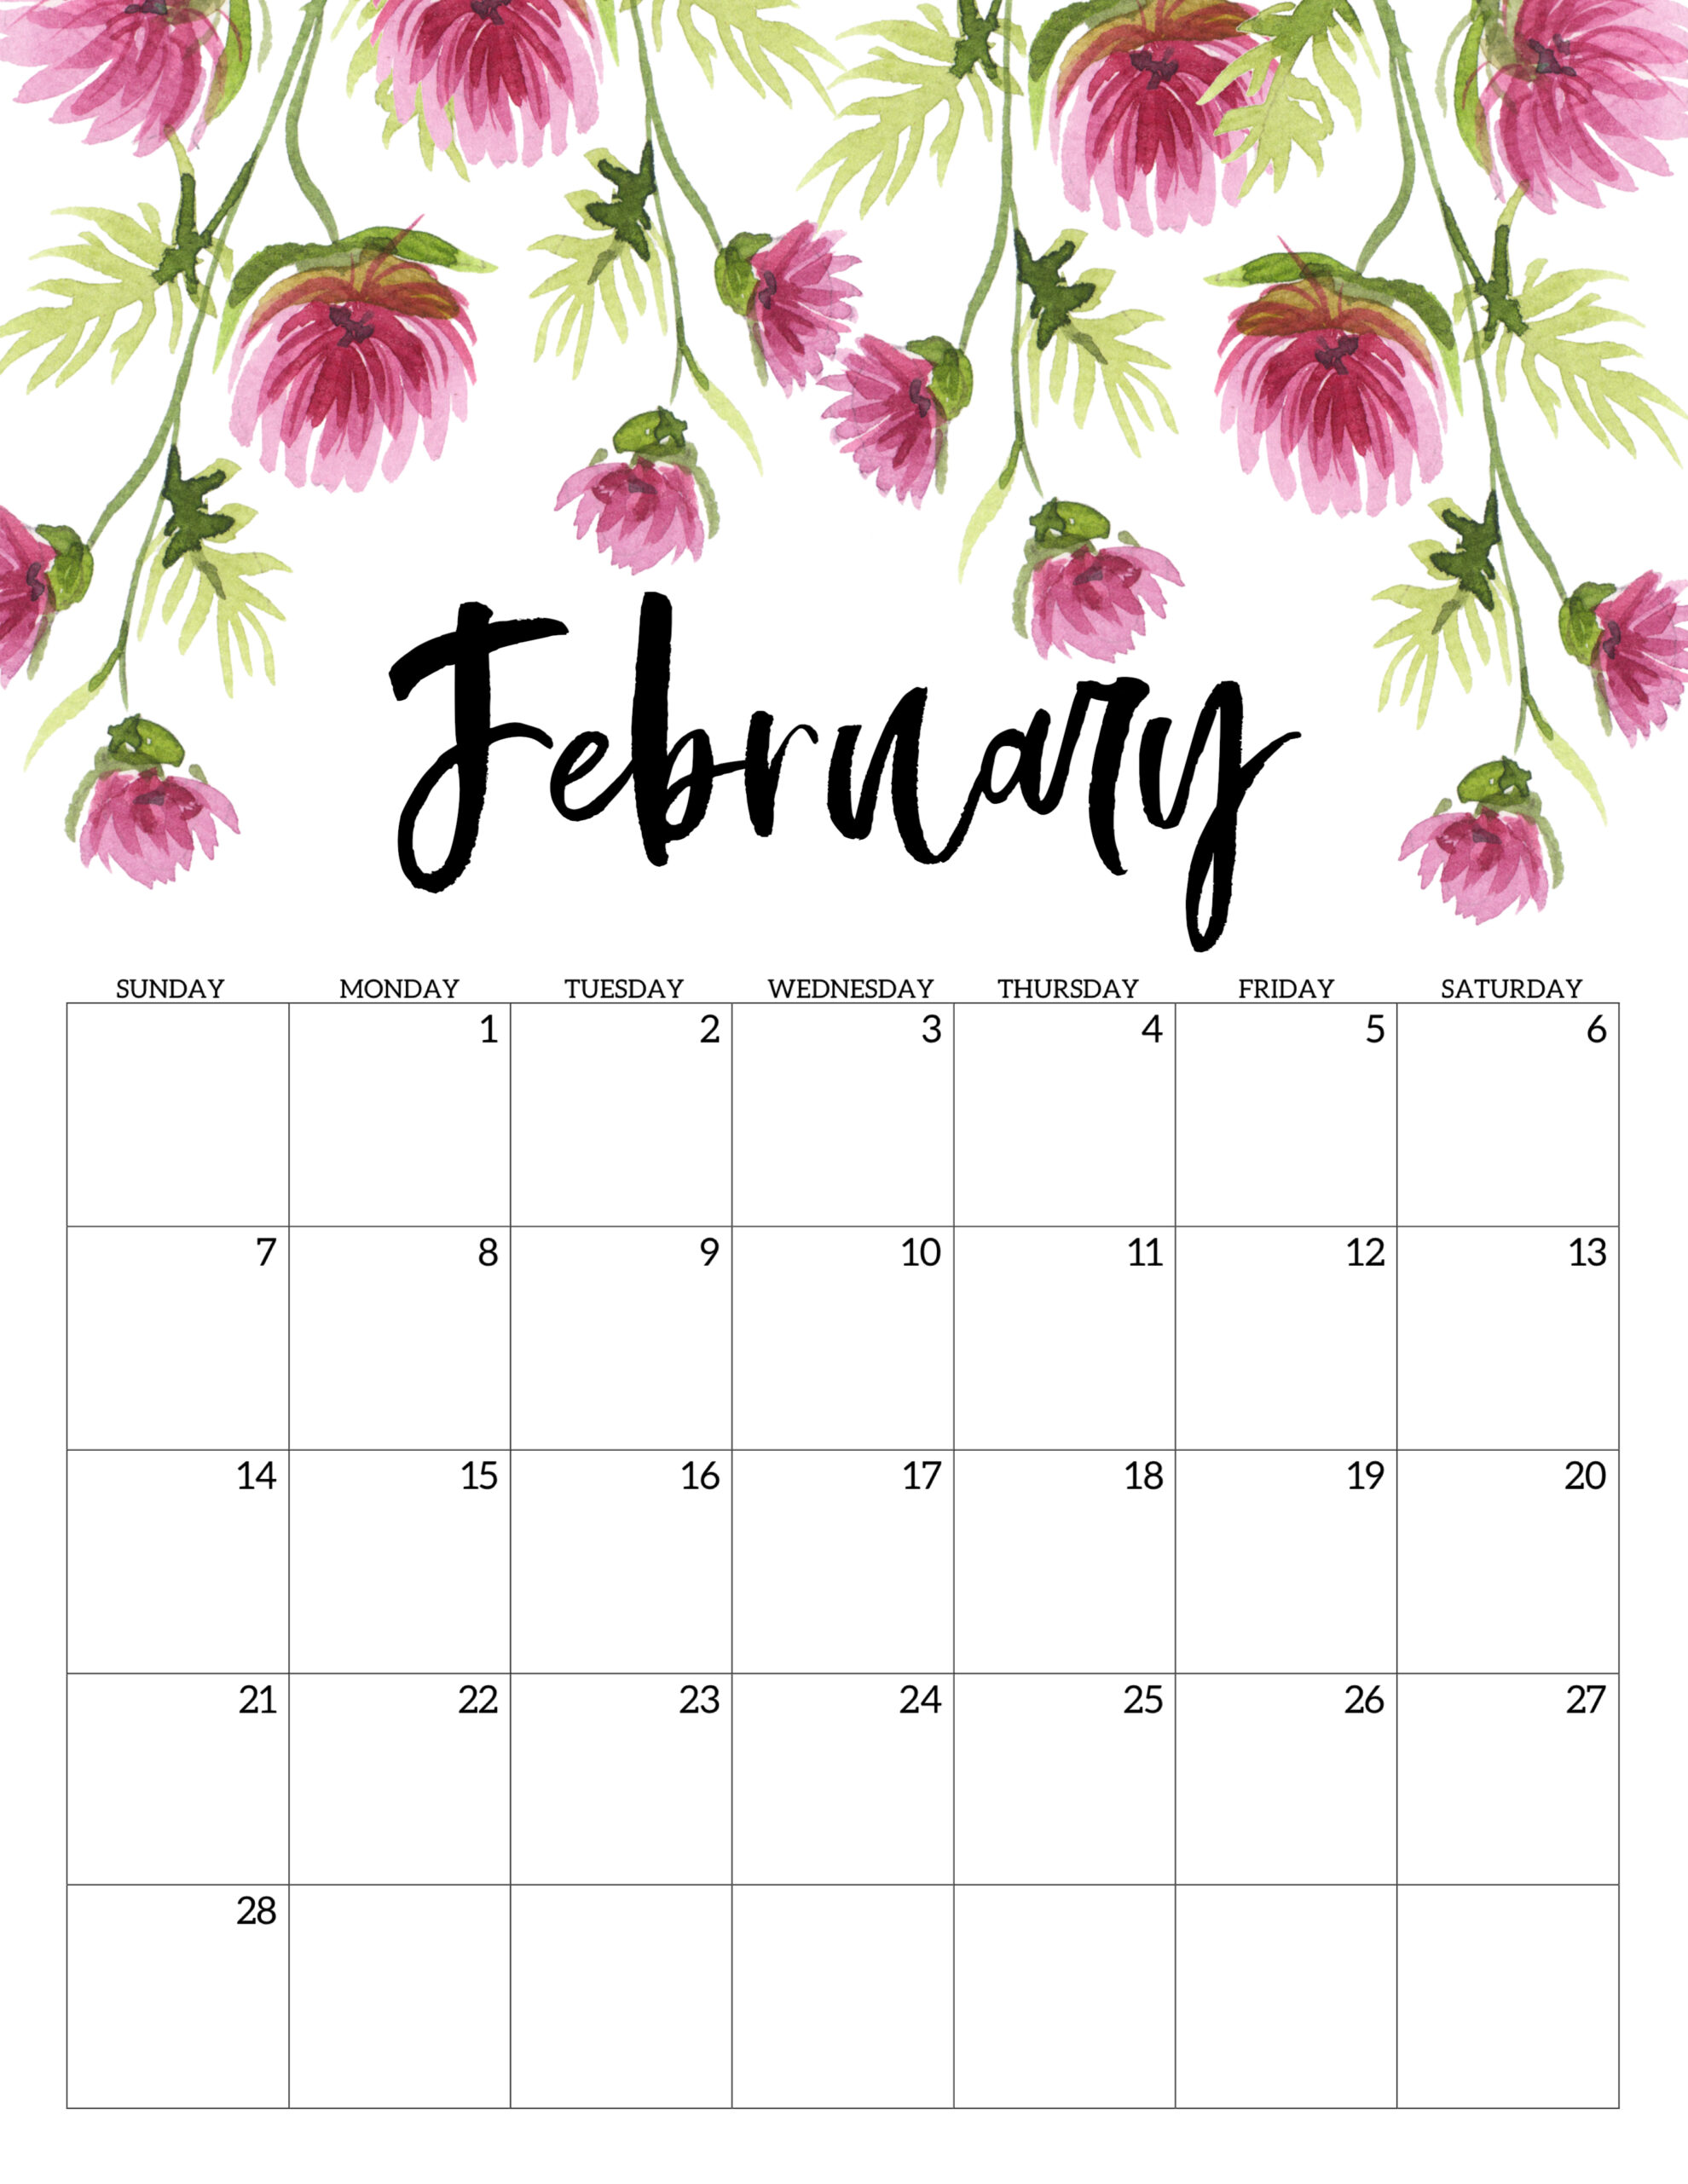 30 Free February 2021 Calendars For Home Or Office Onedesblog